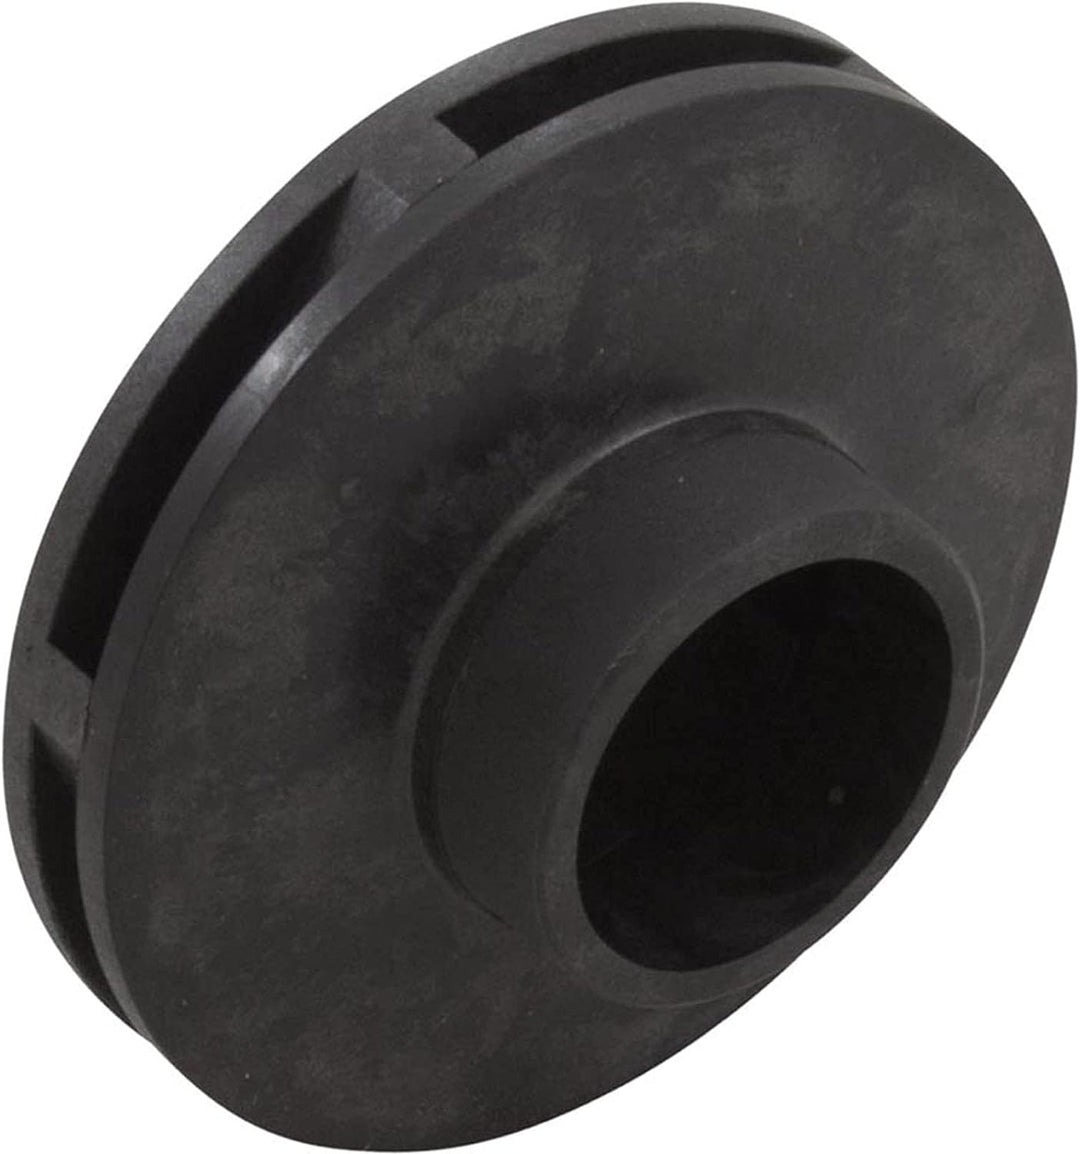 Jandy PlusHP .75 PHPF, 1.0 PHPM Impeller w/Screw, Backplate O-Ring || R0807203